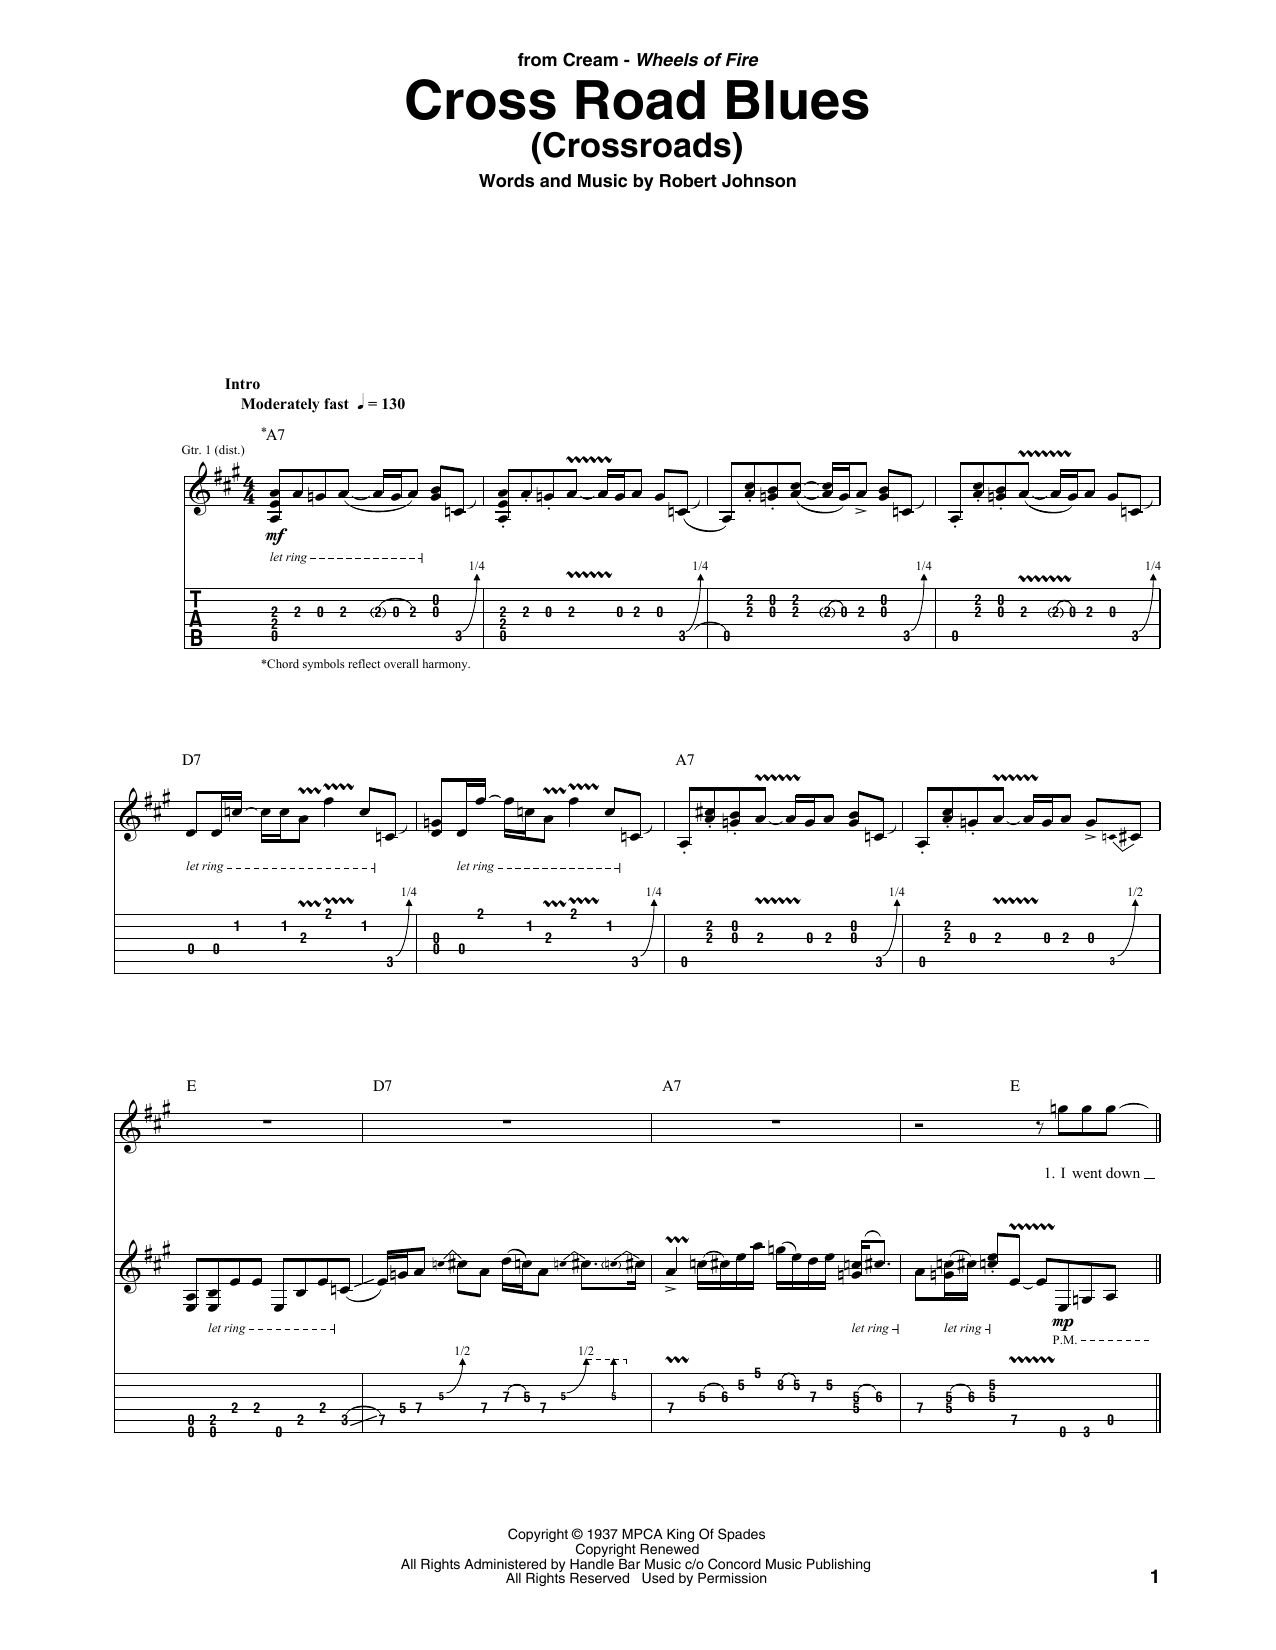 Cream Cross Road Blues (Crossroads) sheet music notes and chords. Download Printable PDF.